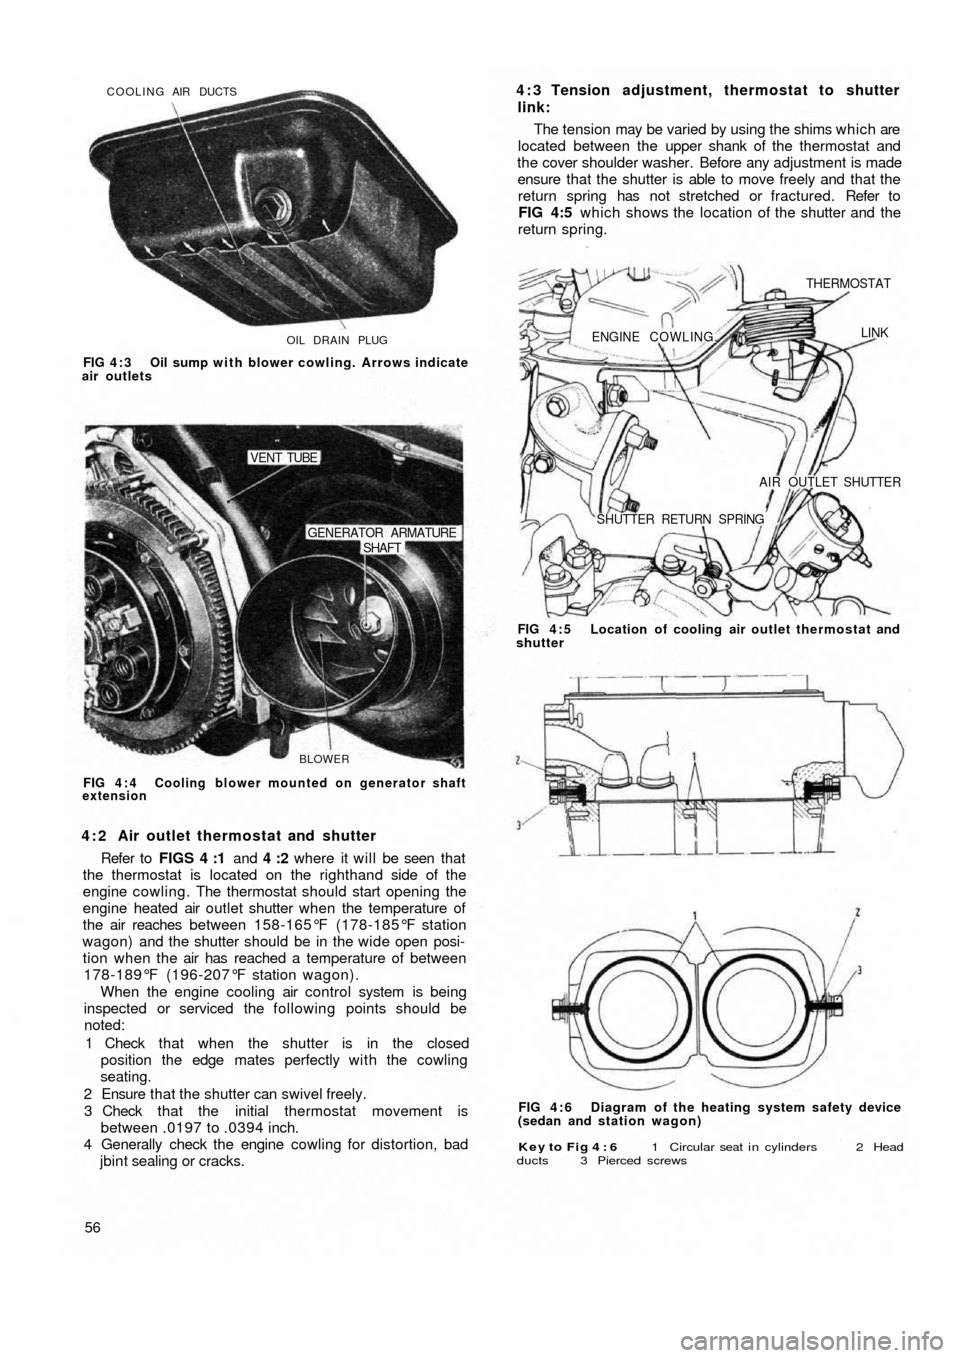 FIAT 500 1969 1.G Service Manual OIL DRAIN PLUG COOLING AIR DUCTS
FIG 4 : 3  Oil sump with blower cowling. Arrows indicate
air outlets
BLOWER
SHAFT GENERATOR ARMATURE
VENT TUBE
FIG 4 : 4  Cooling blower mounted on generator shaft
ext